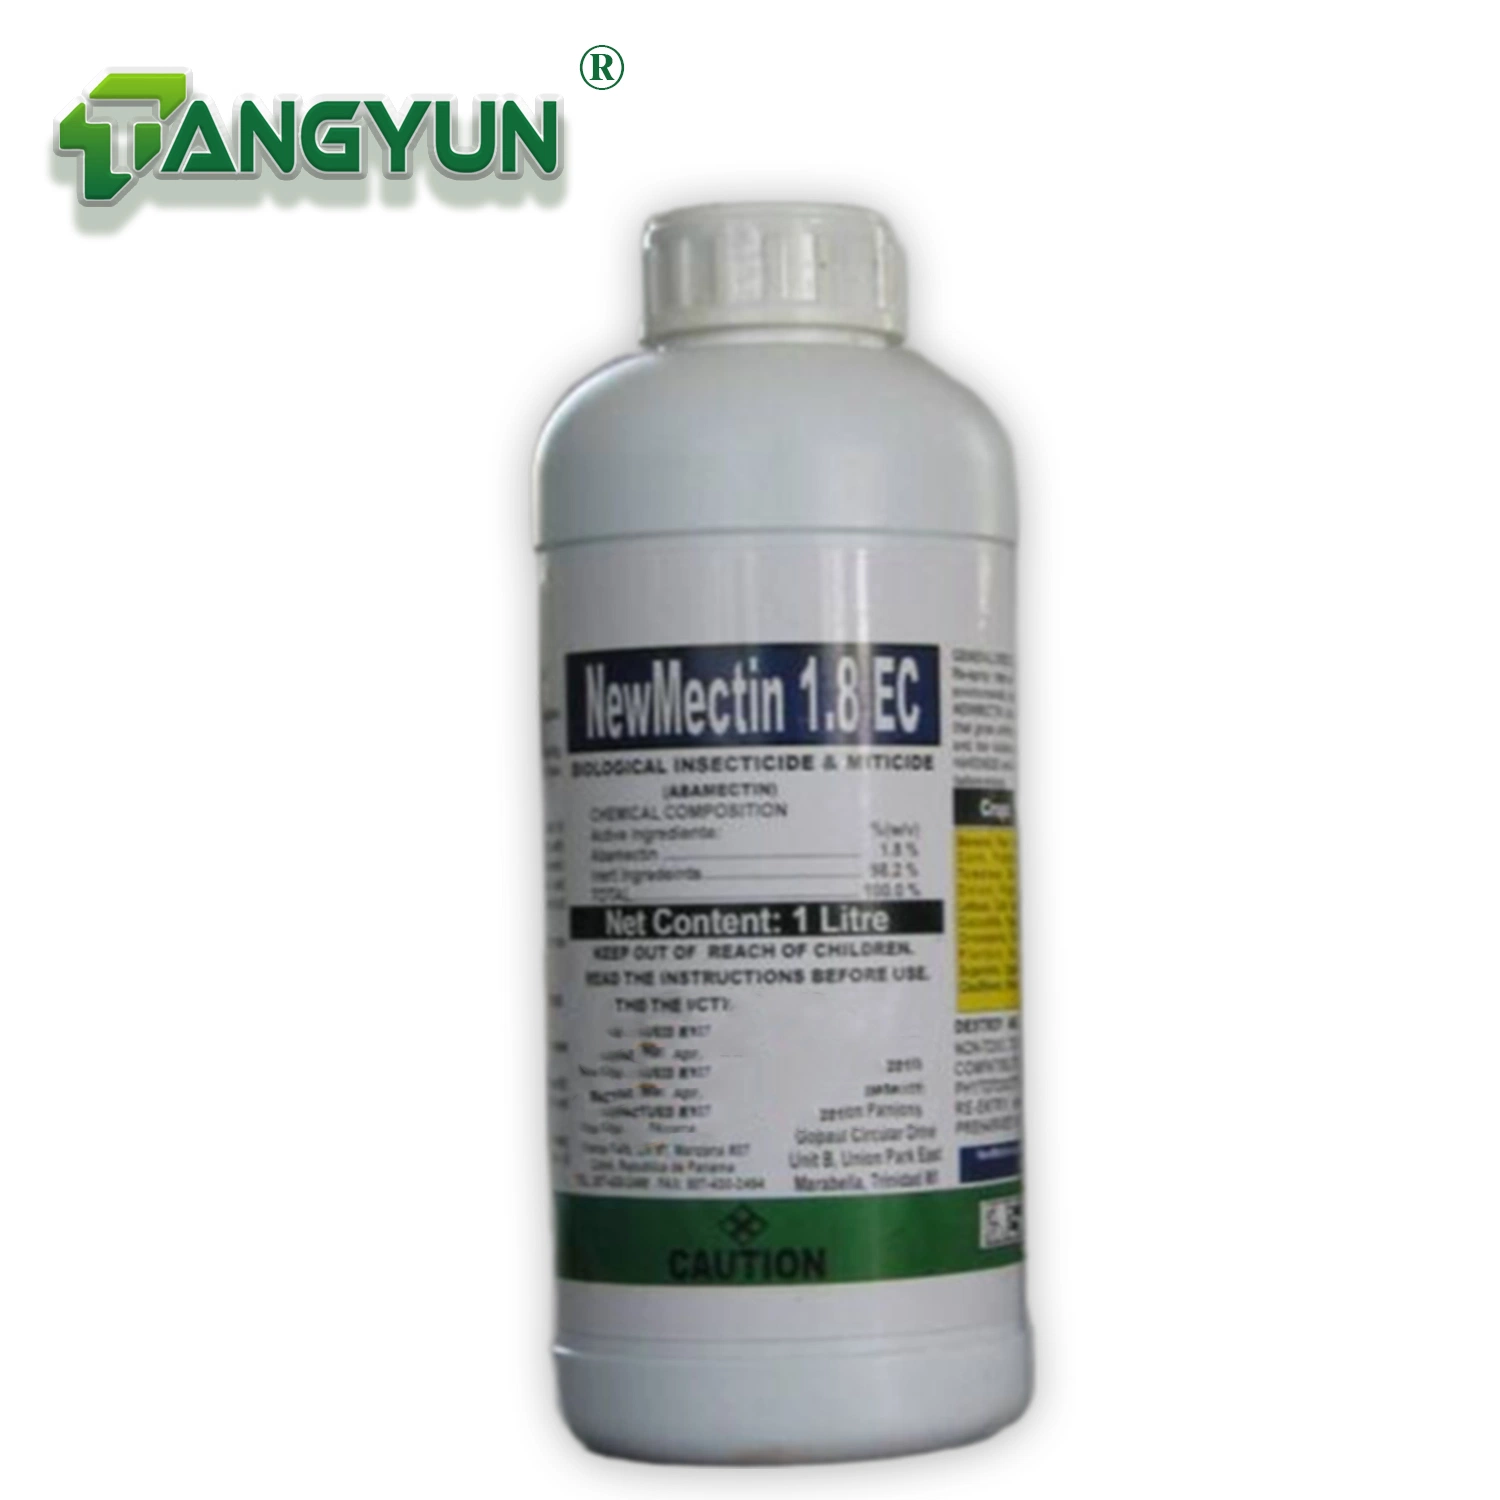 Acaricide Insecticides Abamectin 1.8%Ec 3.6%Ec Contact and Stomach Poisoning